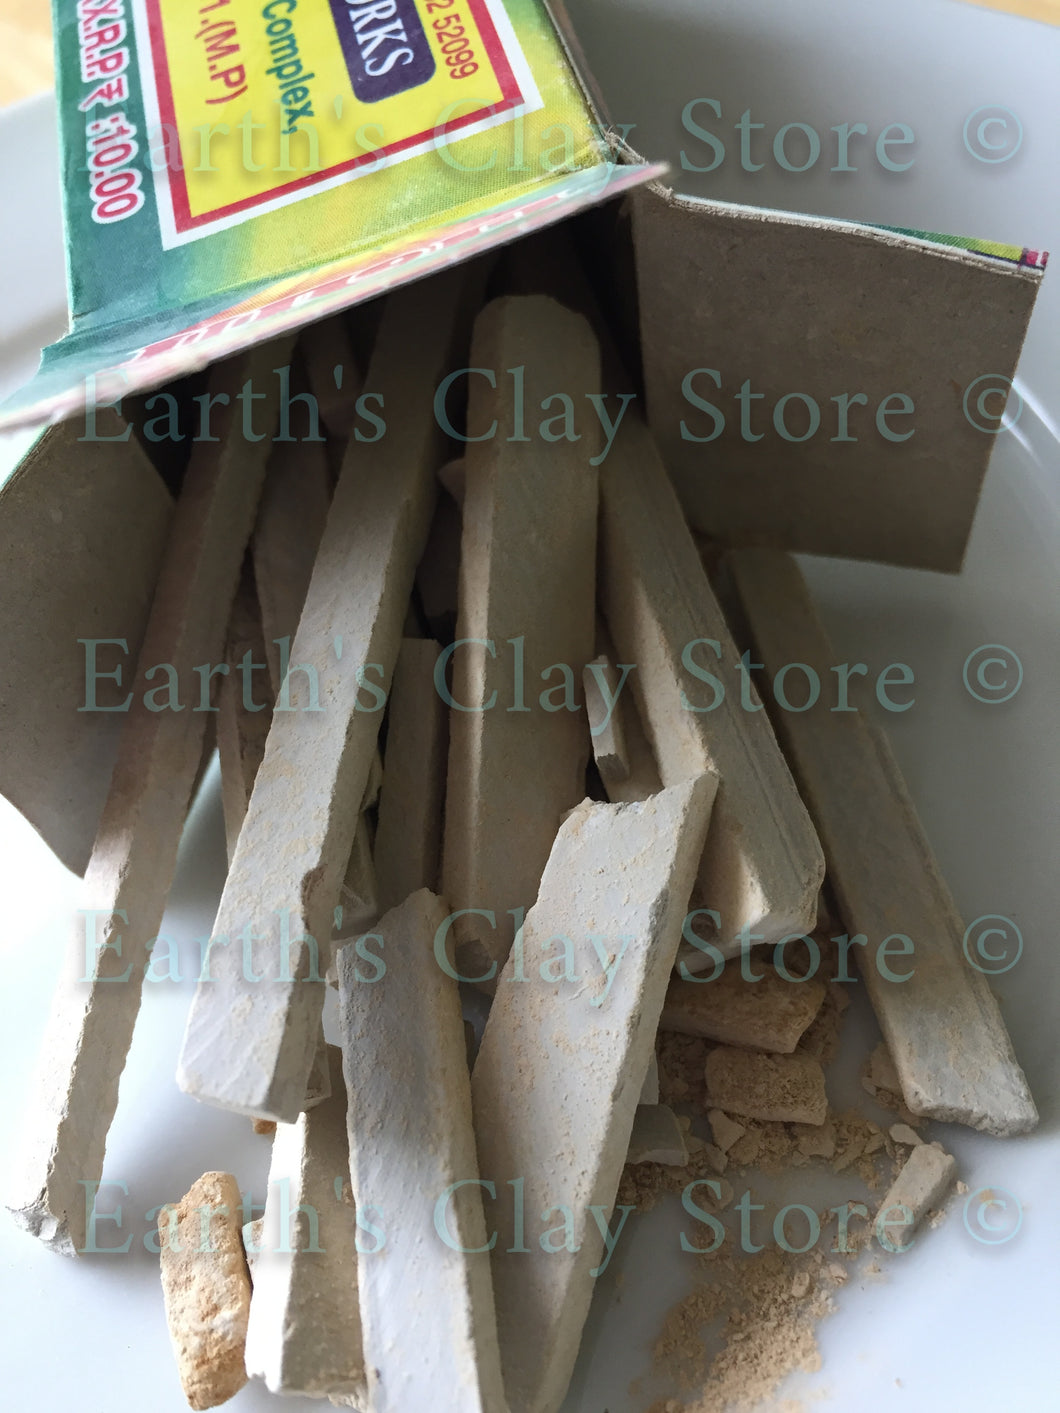 Syed Slate Pencil Box – Earth's Clay Store